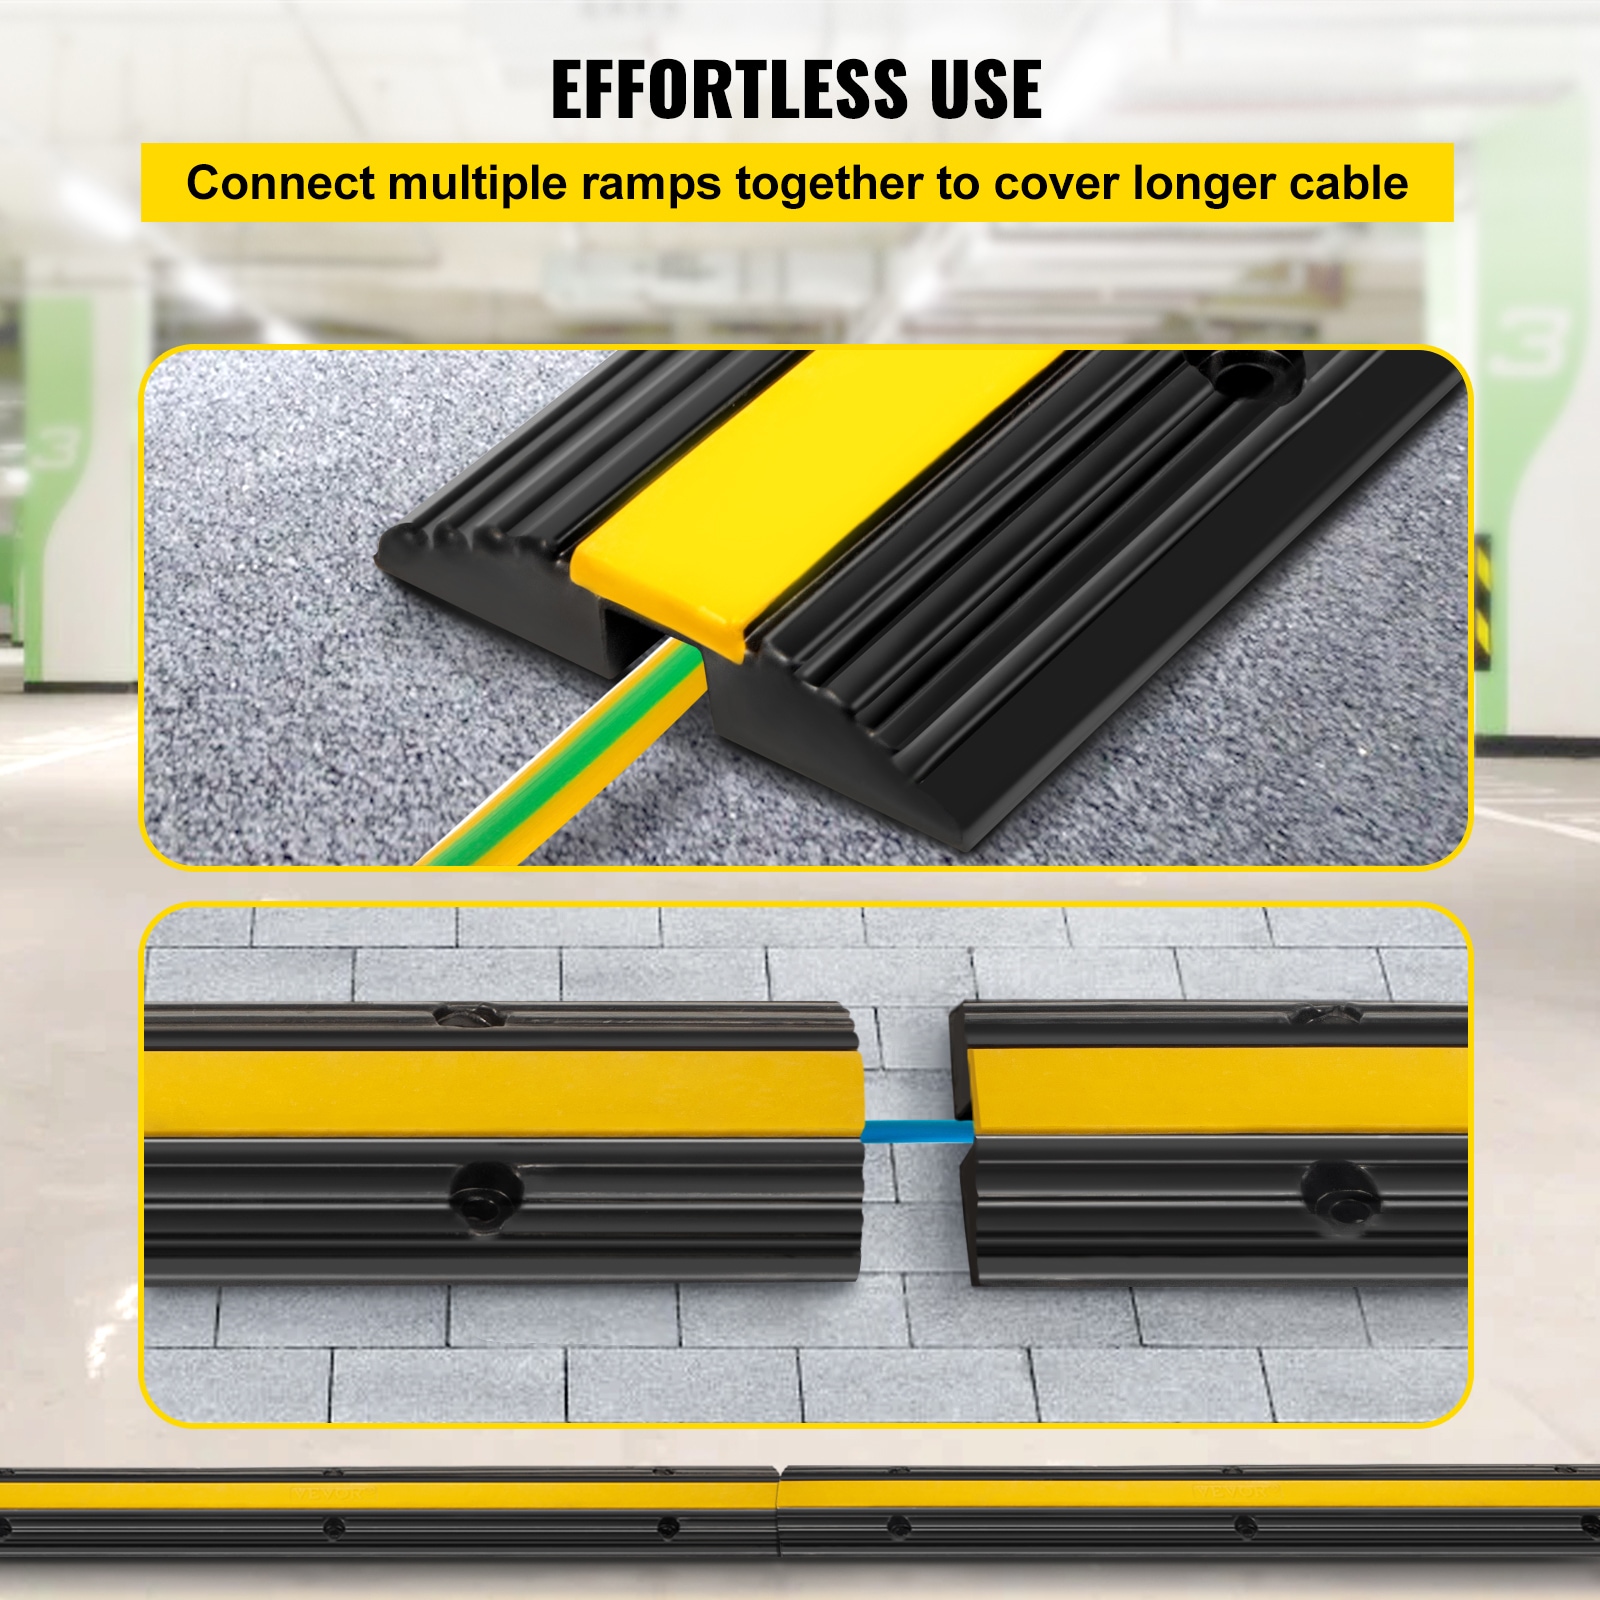 Cable Ramps & Floor Covers - Cable Protectors - Grainger